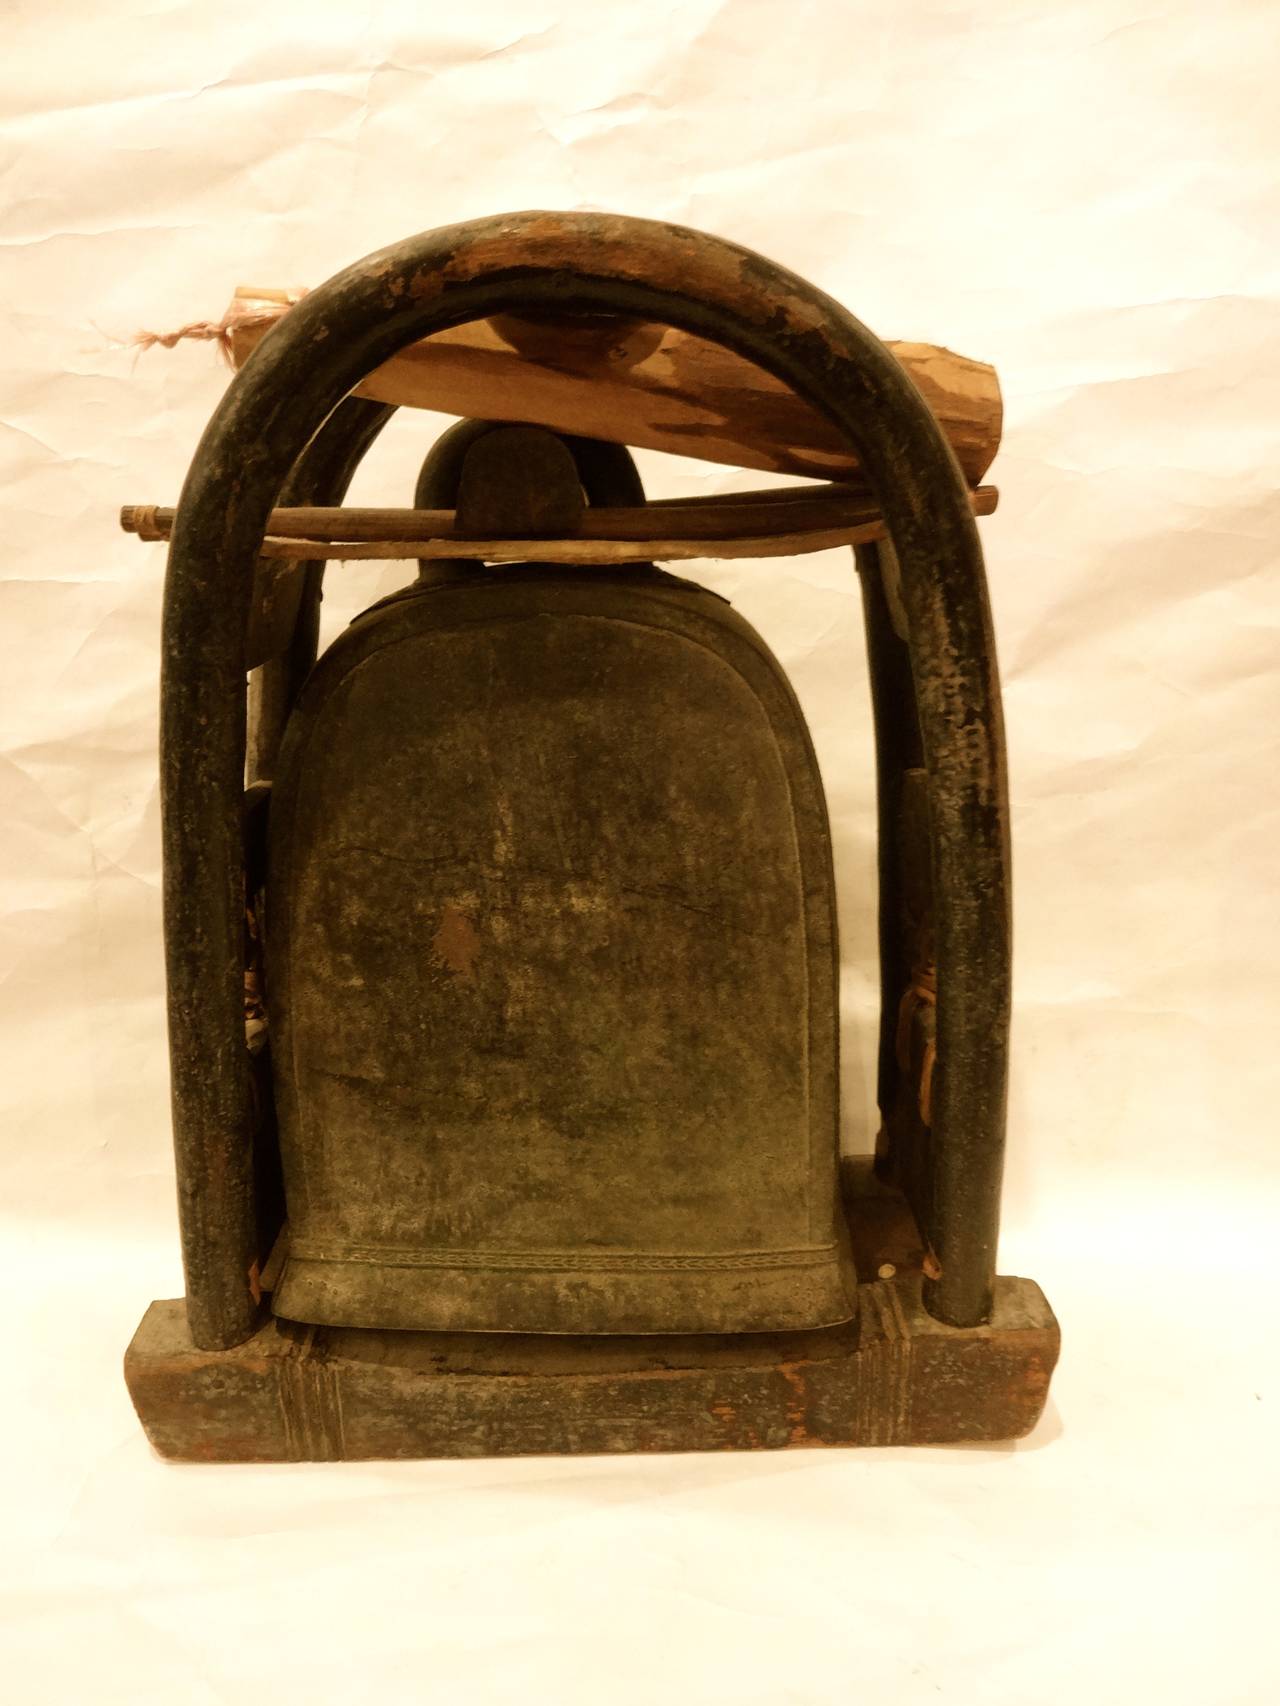 An antique Burmese bronze elephant bell in hand made wooden and leather holder with wooden striker